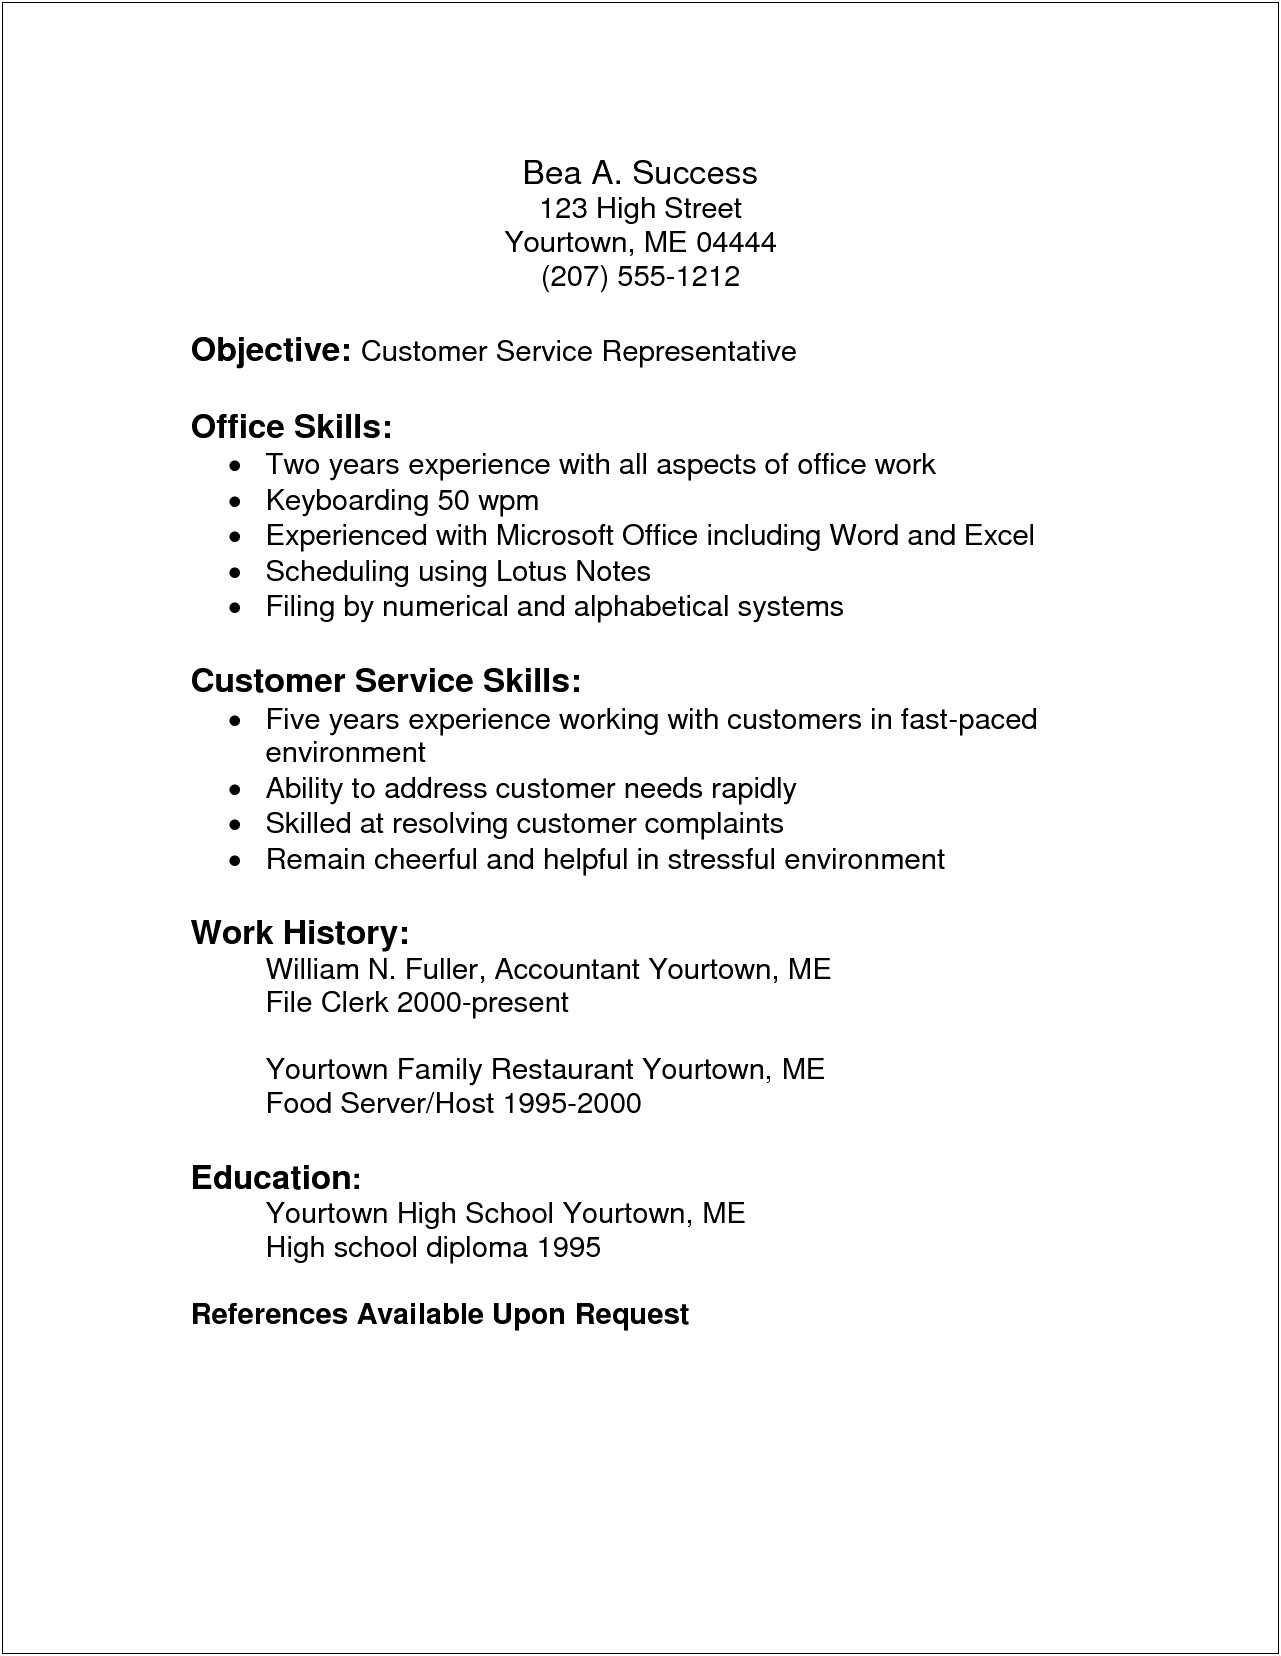 Skills To Include On Resume For Customer Service